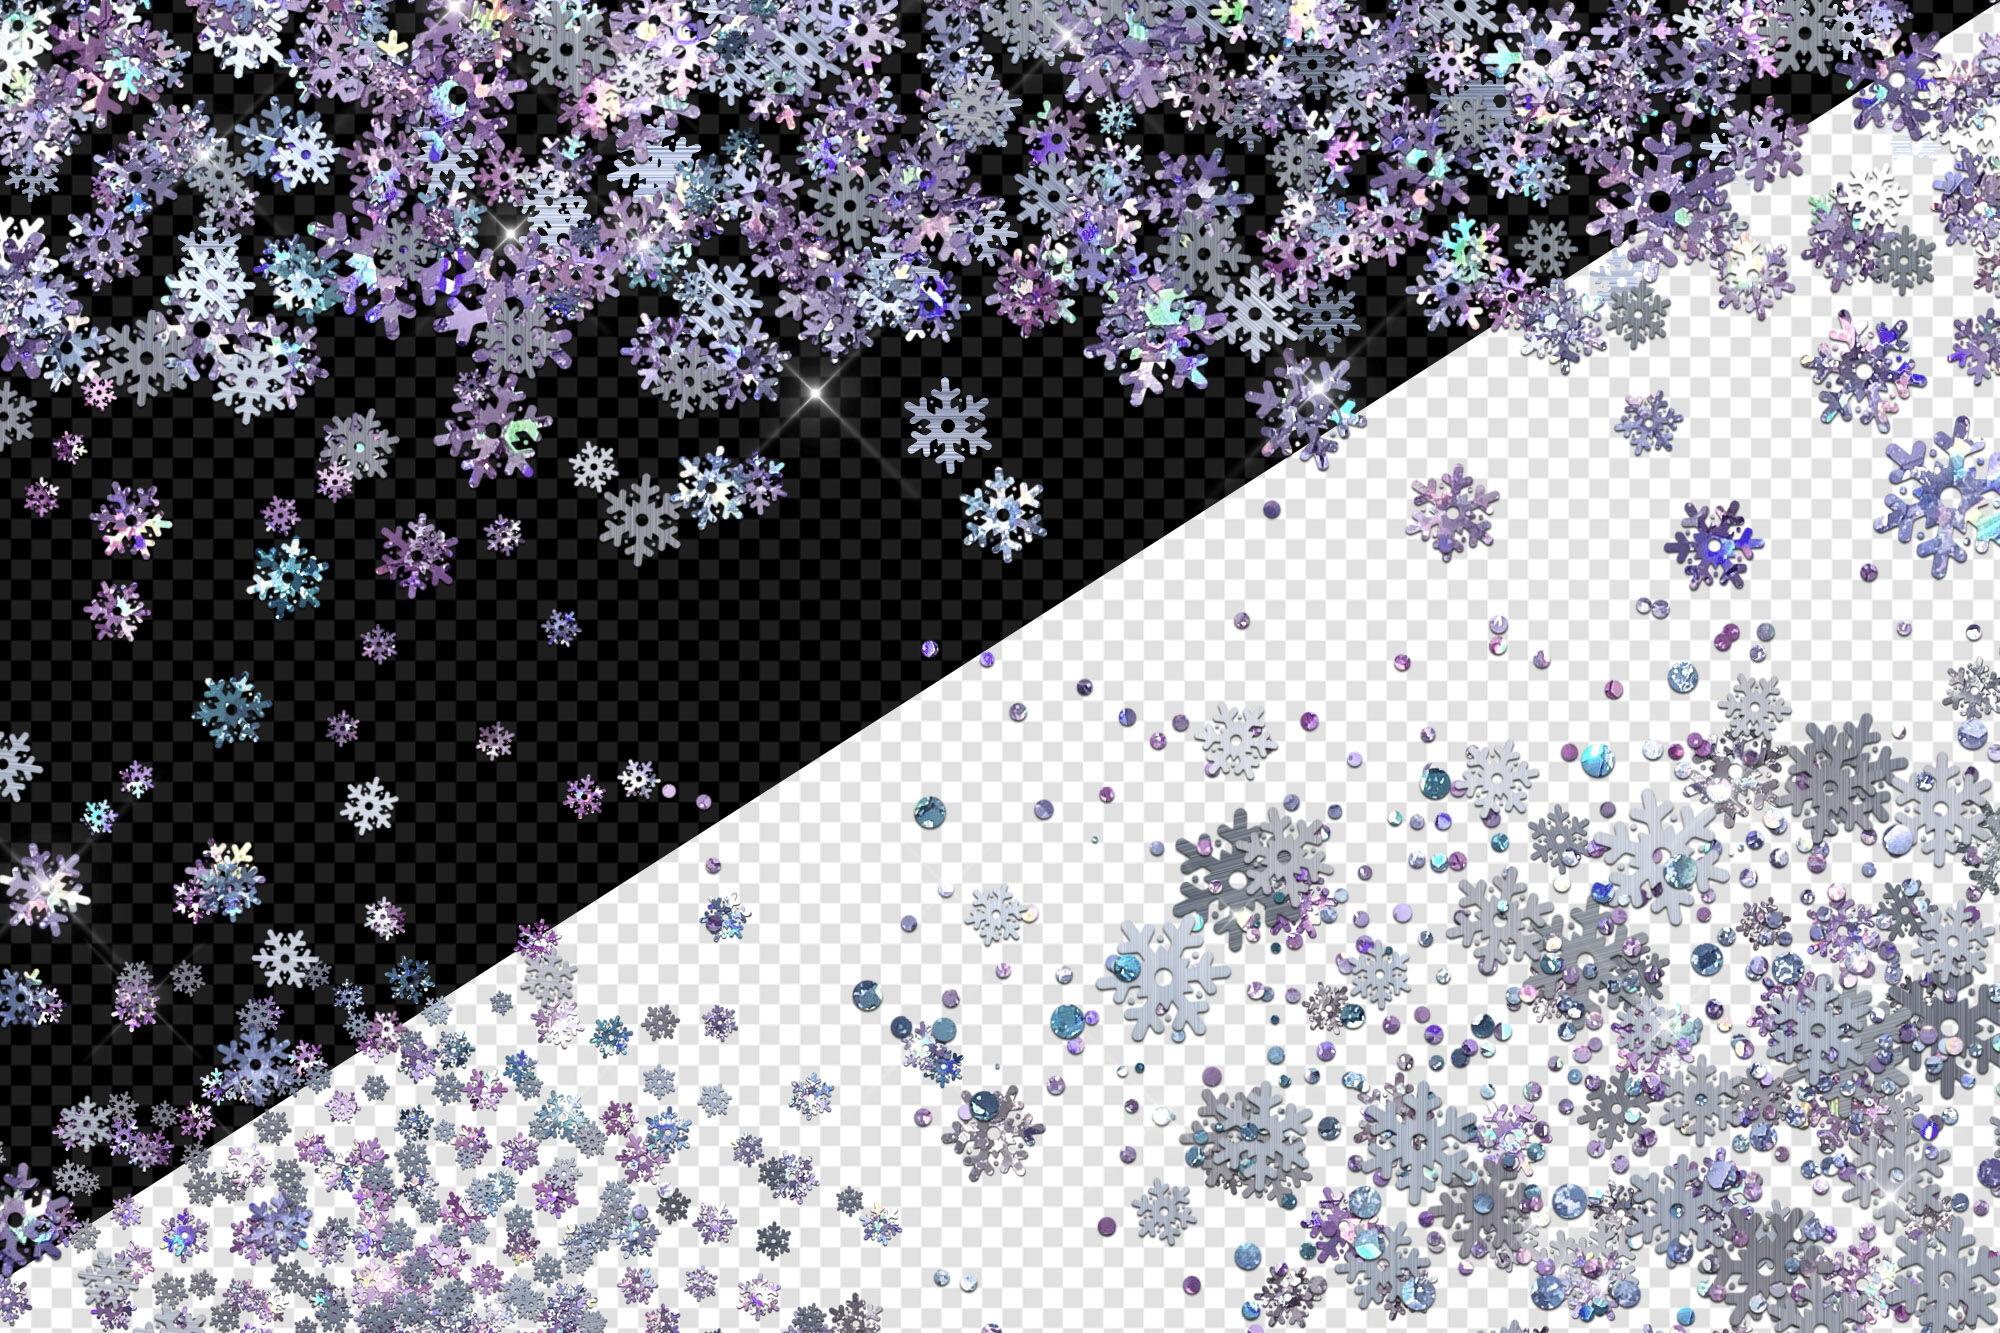 Holographic Snowflake Glitter Overlays By Digital Curio